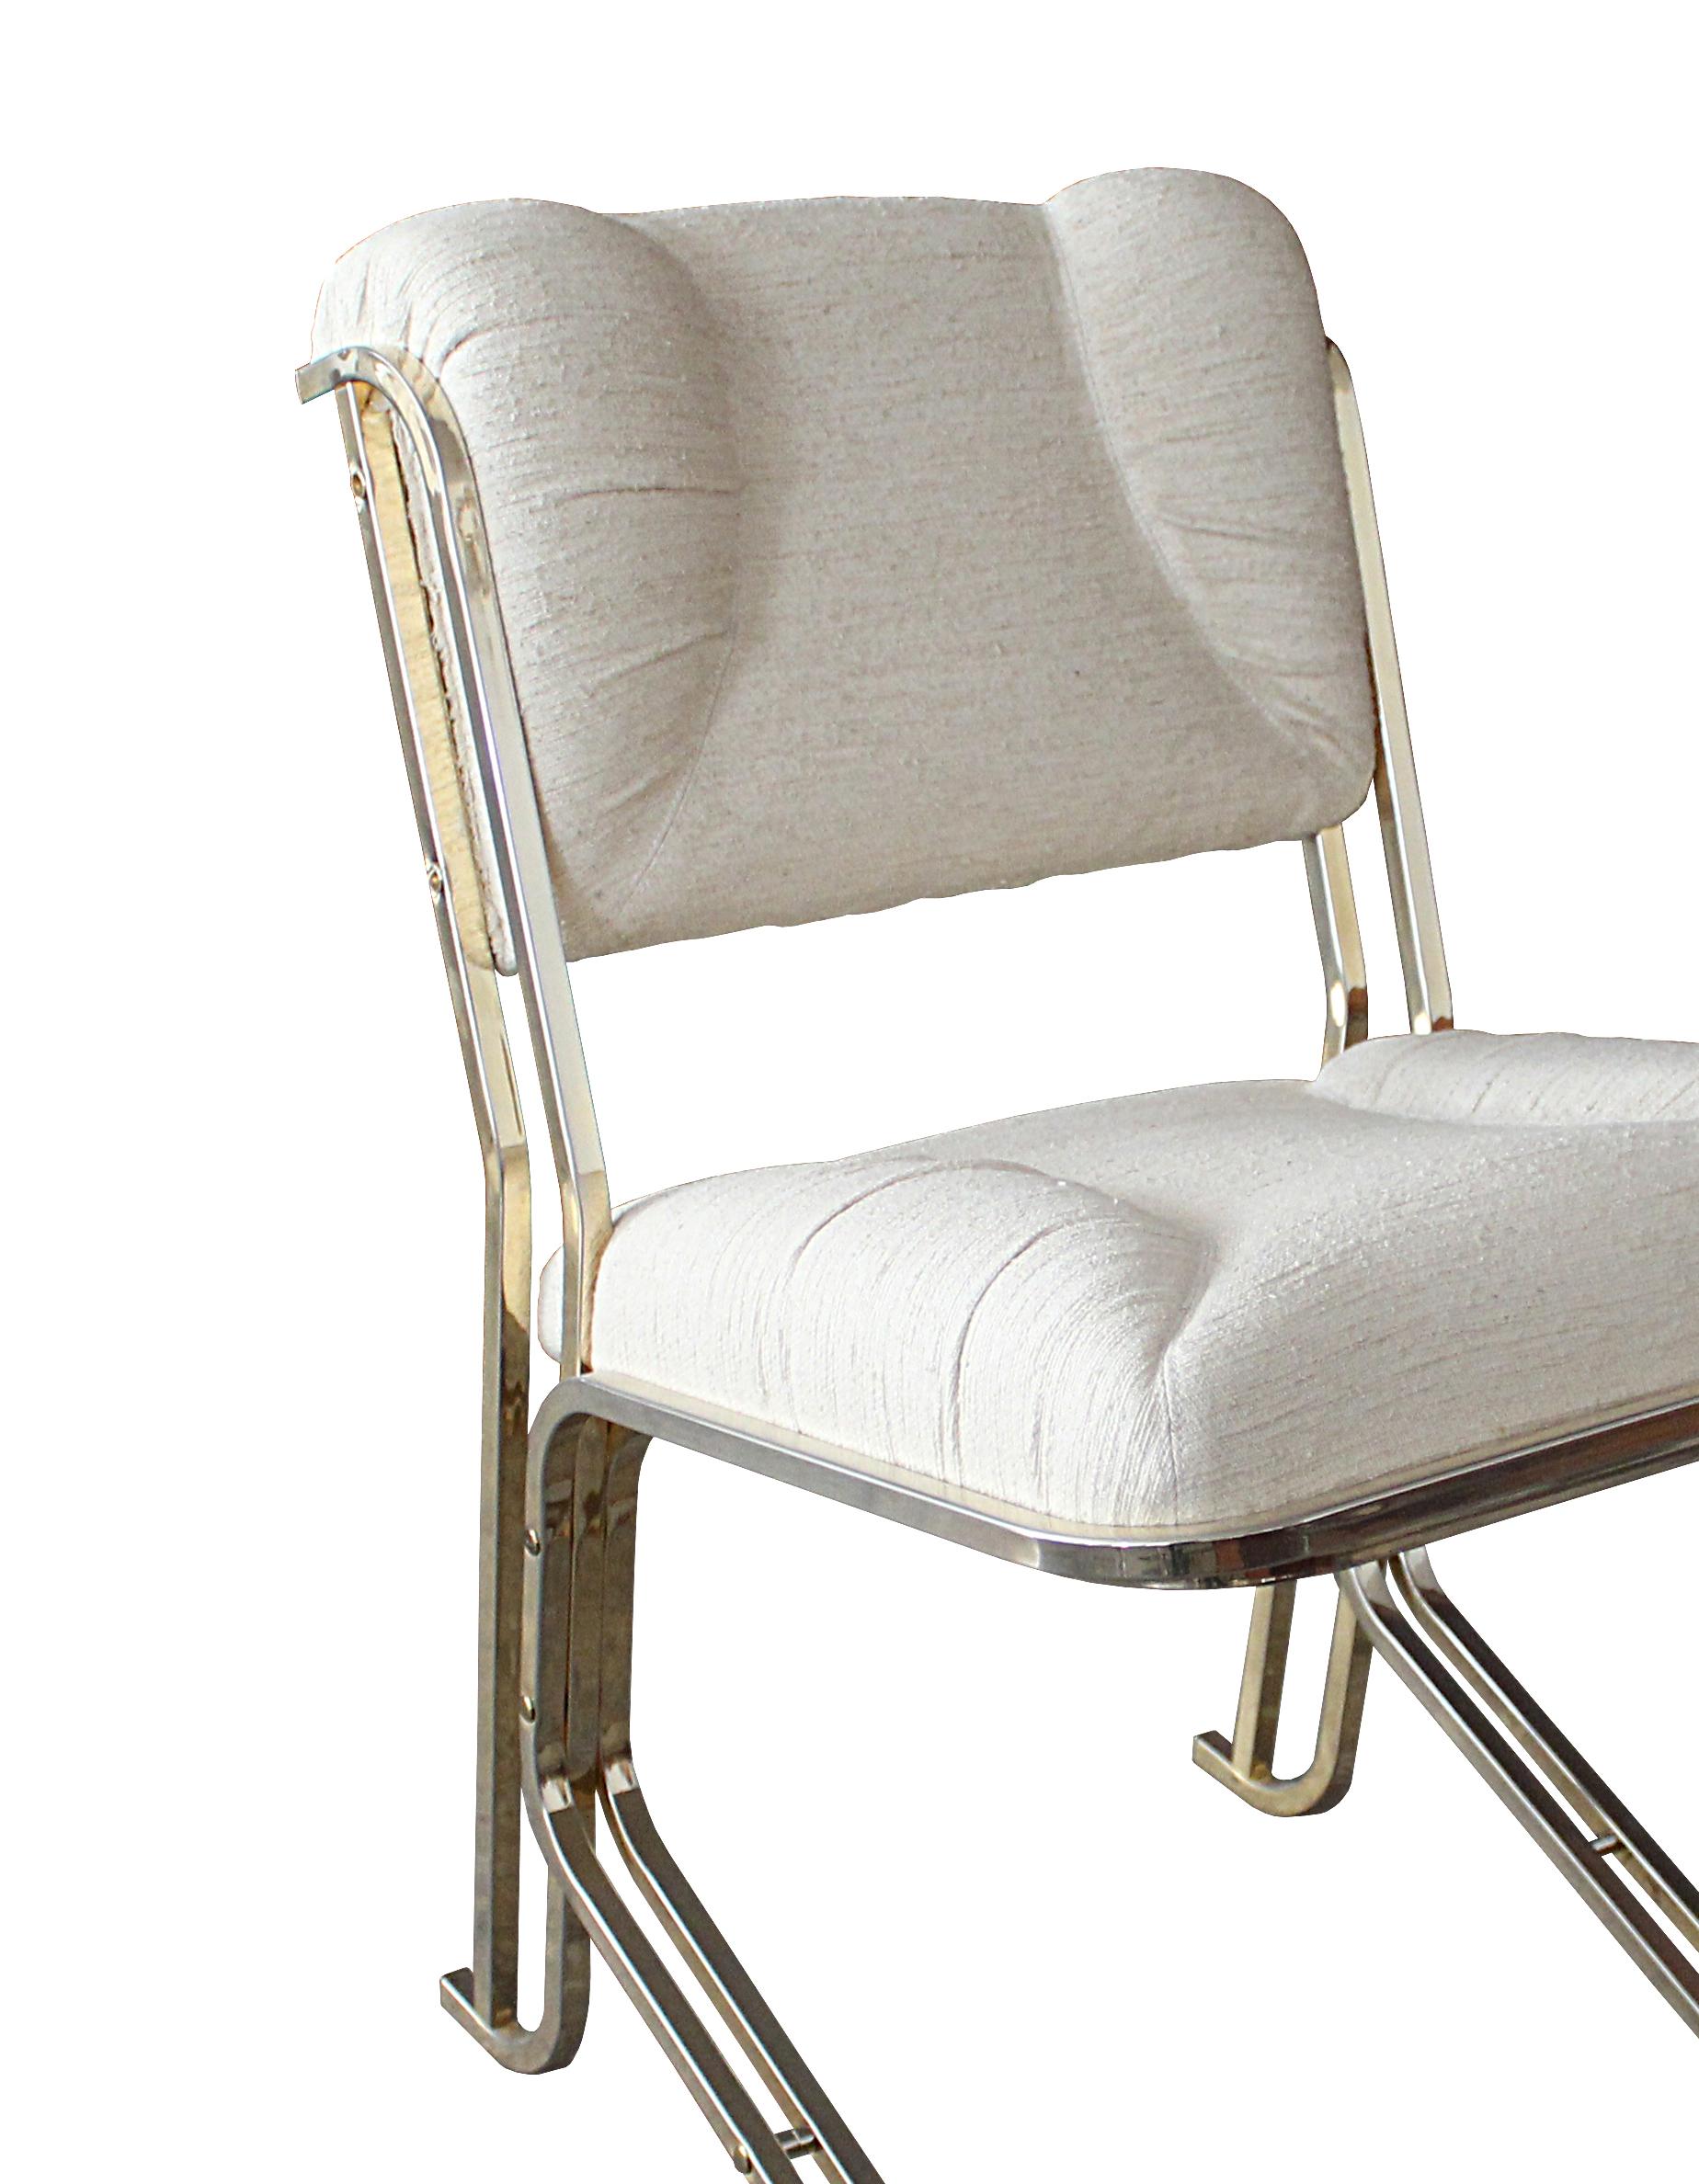 The grace and elegance of swans is celebrated in this exclusive lounge chair that will exude sophisitication into any style interior. The robust frame features parallel, cylindrical elements crafted of satin brass. Generously padded and upholstered